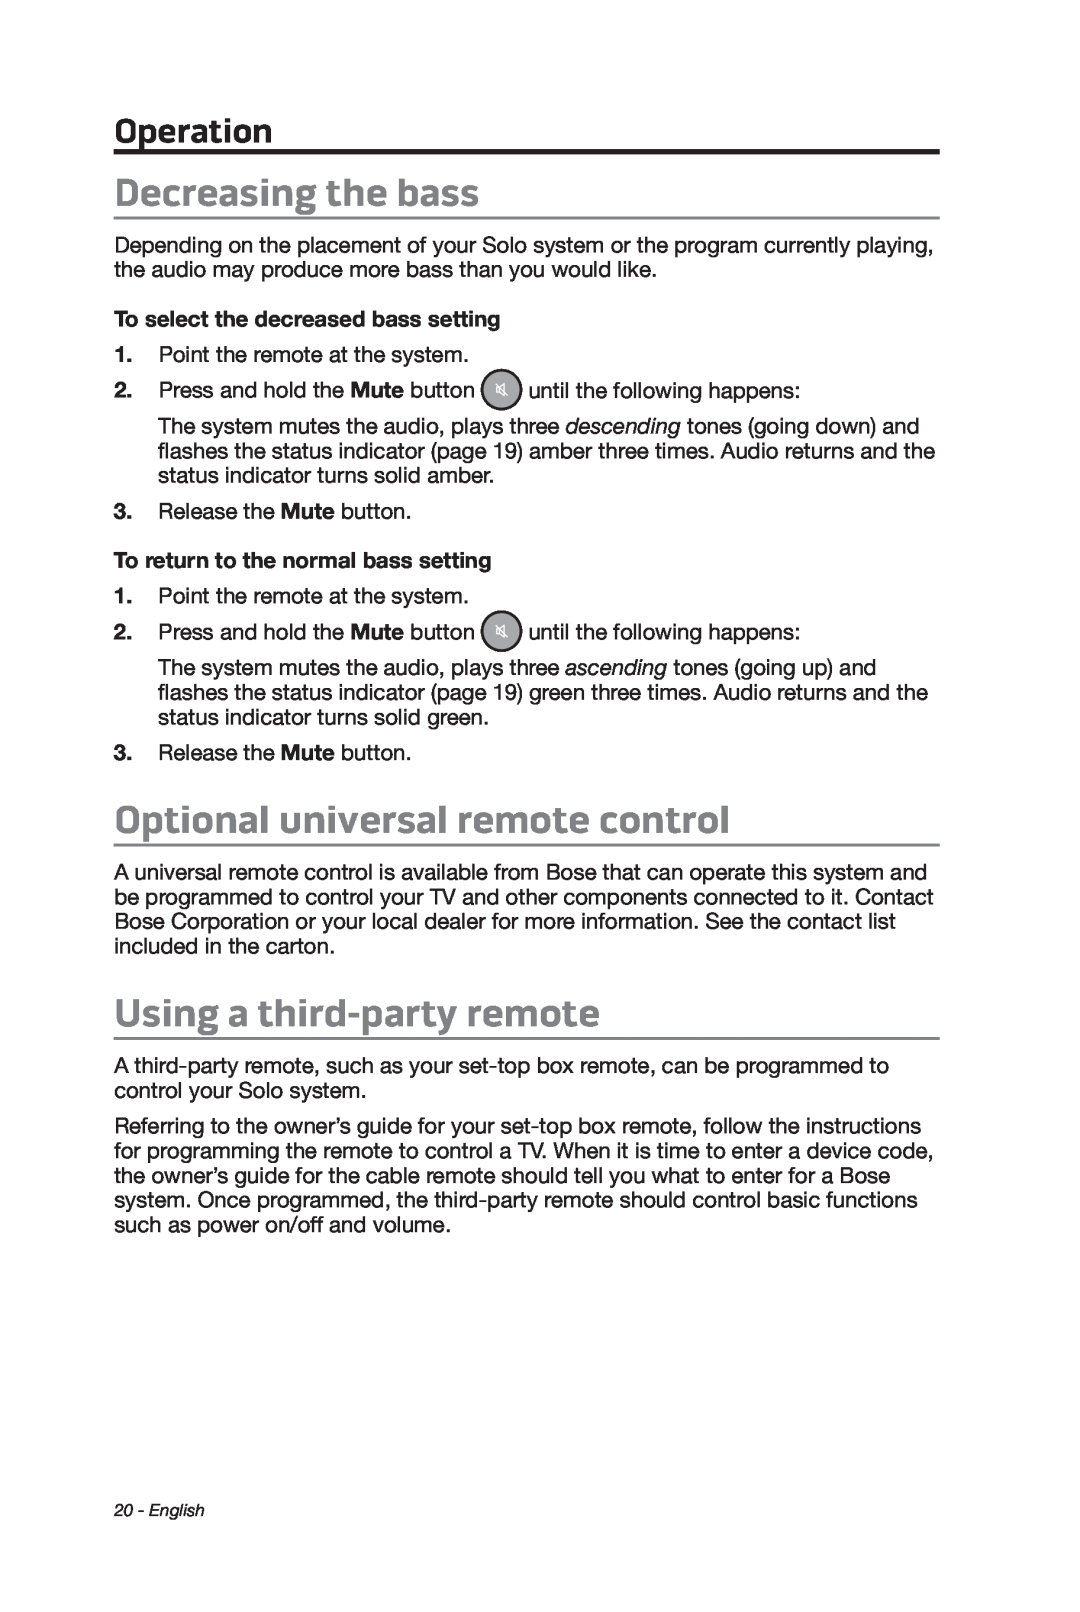 Bose 347205/1300 manual Decreasing the bass, Optional universal remote control, Using a third-partyremote, Operation 